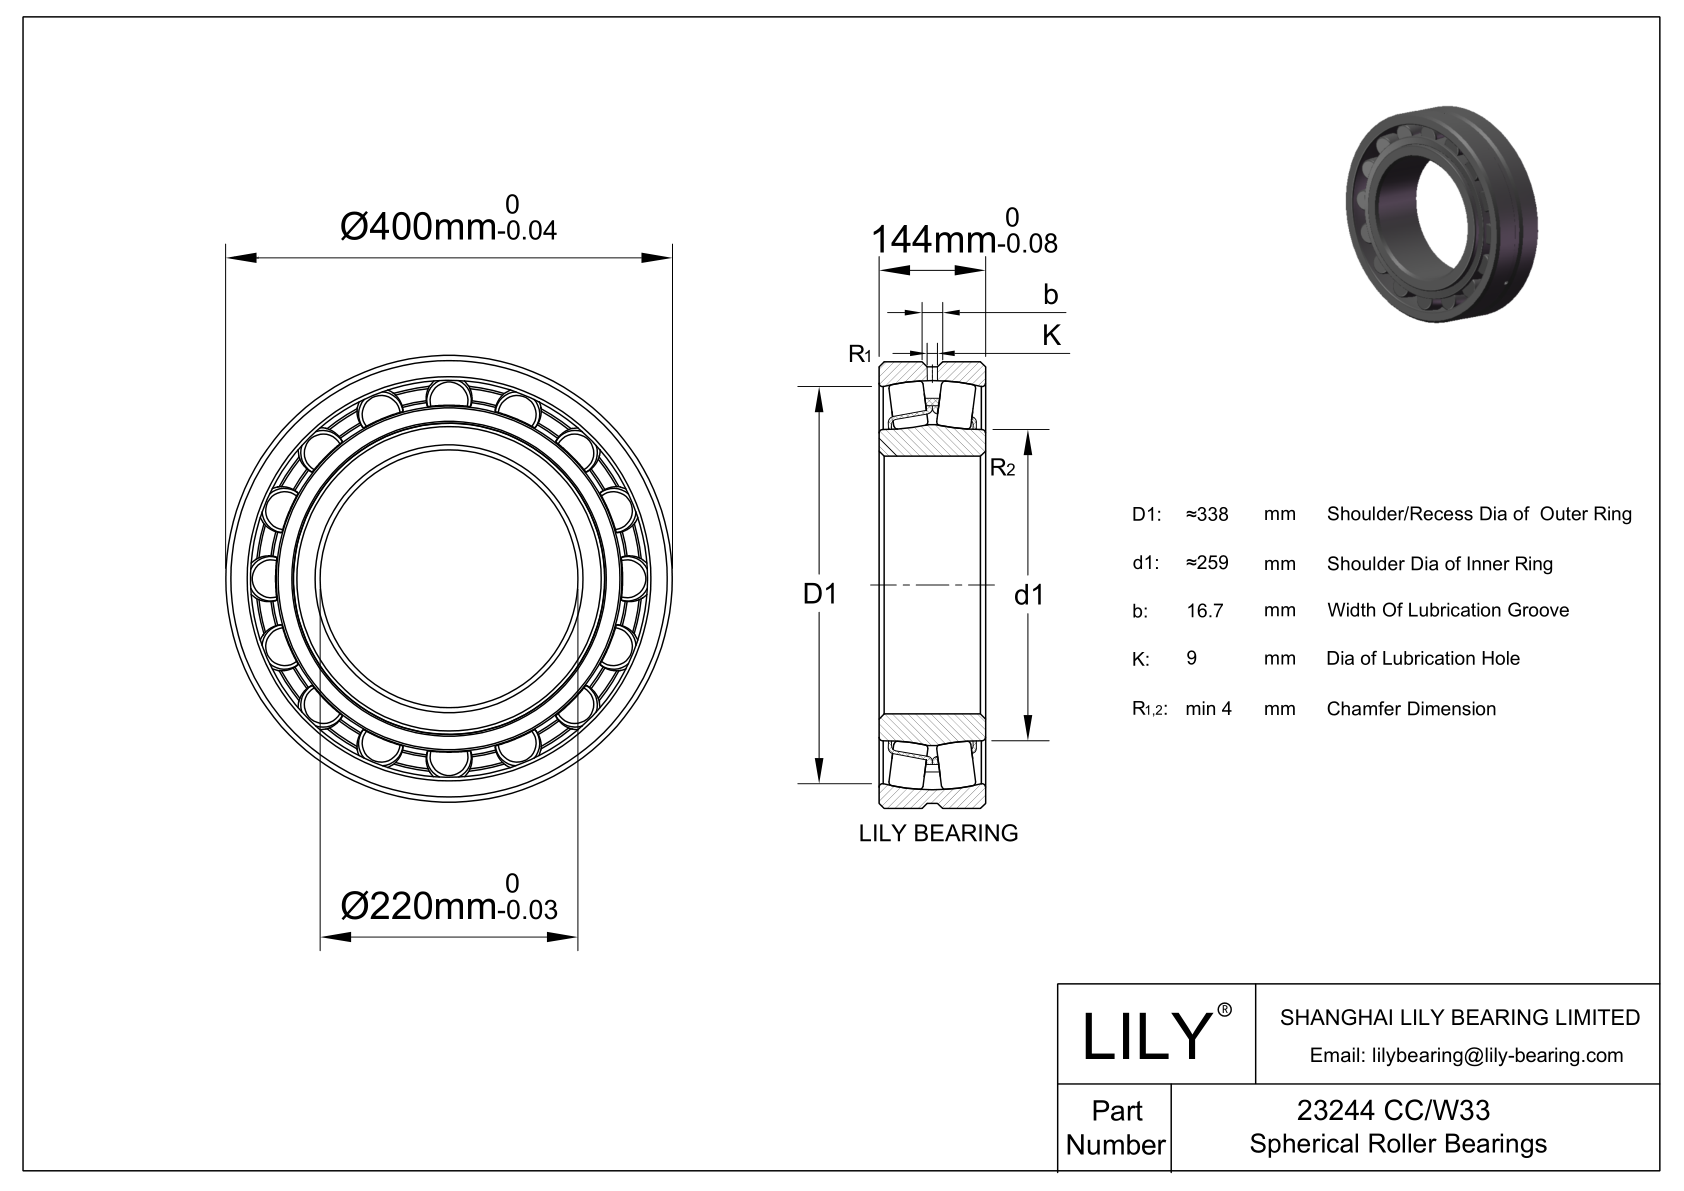 23244 CC/W33 Double Row Spherical Roller Bearing cad drawing